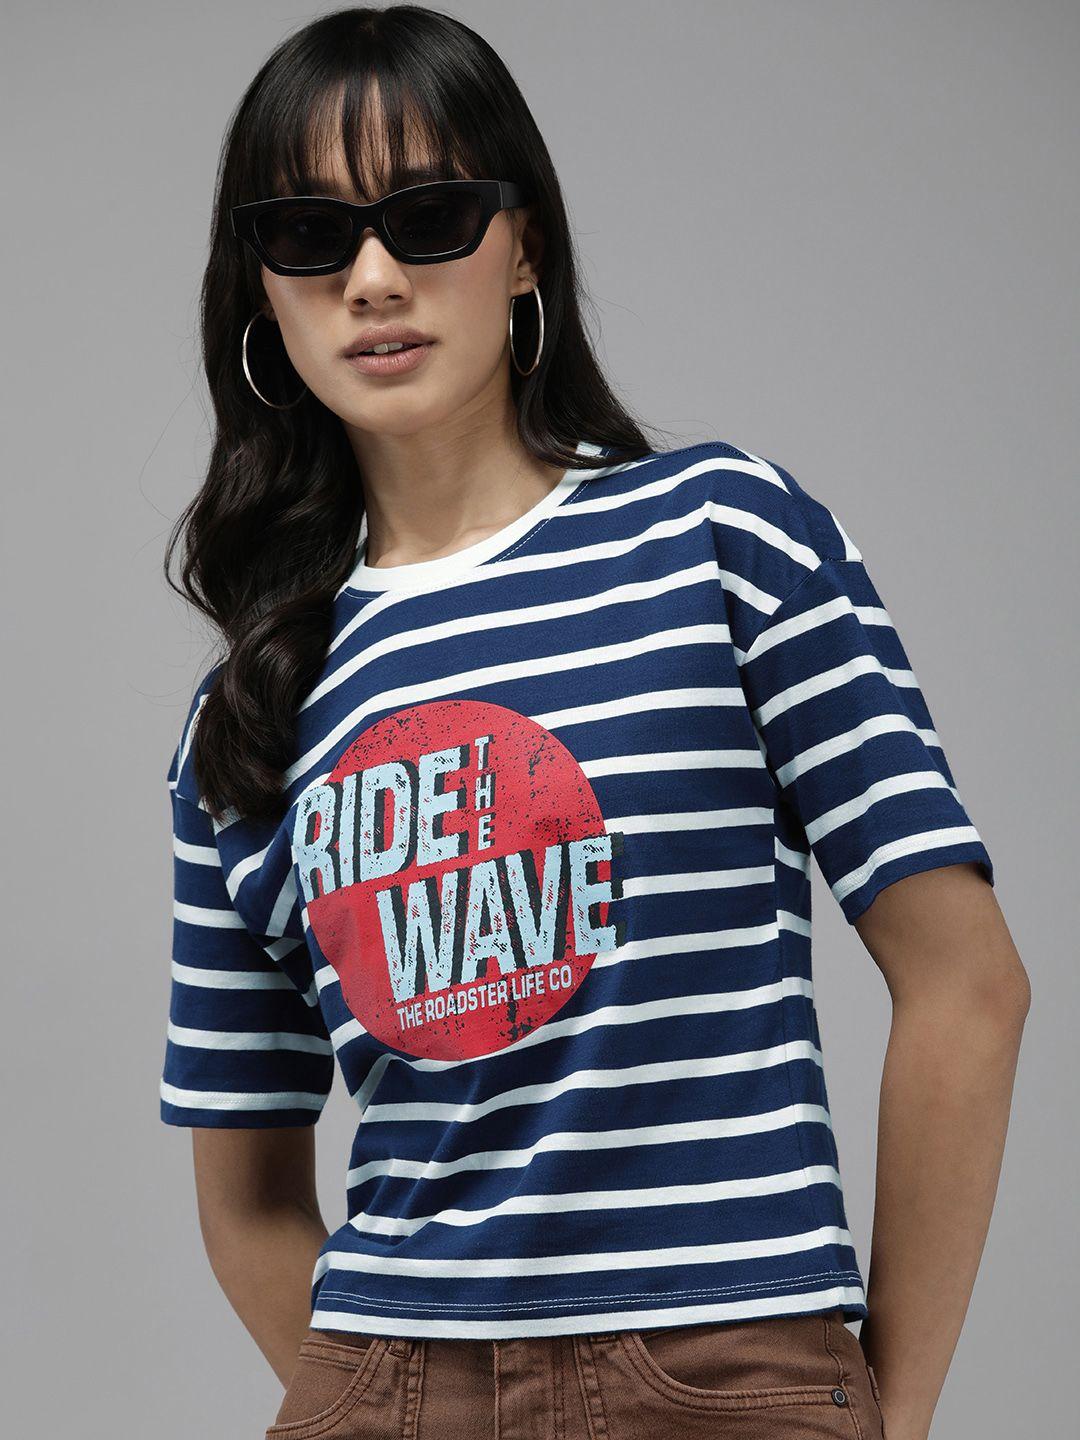 the roadster life co. typography printed striped pure cotton t-shirt